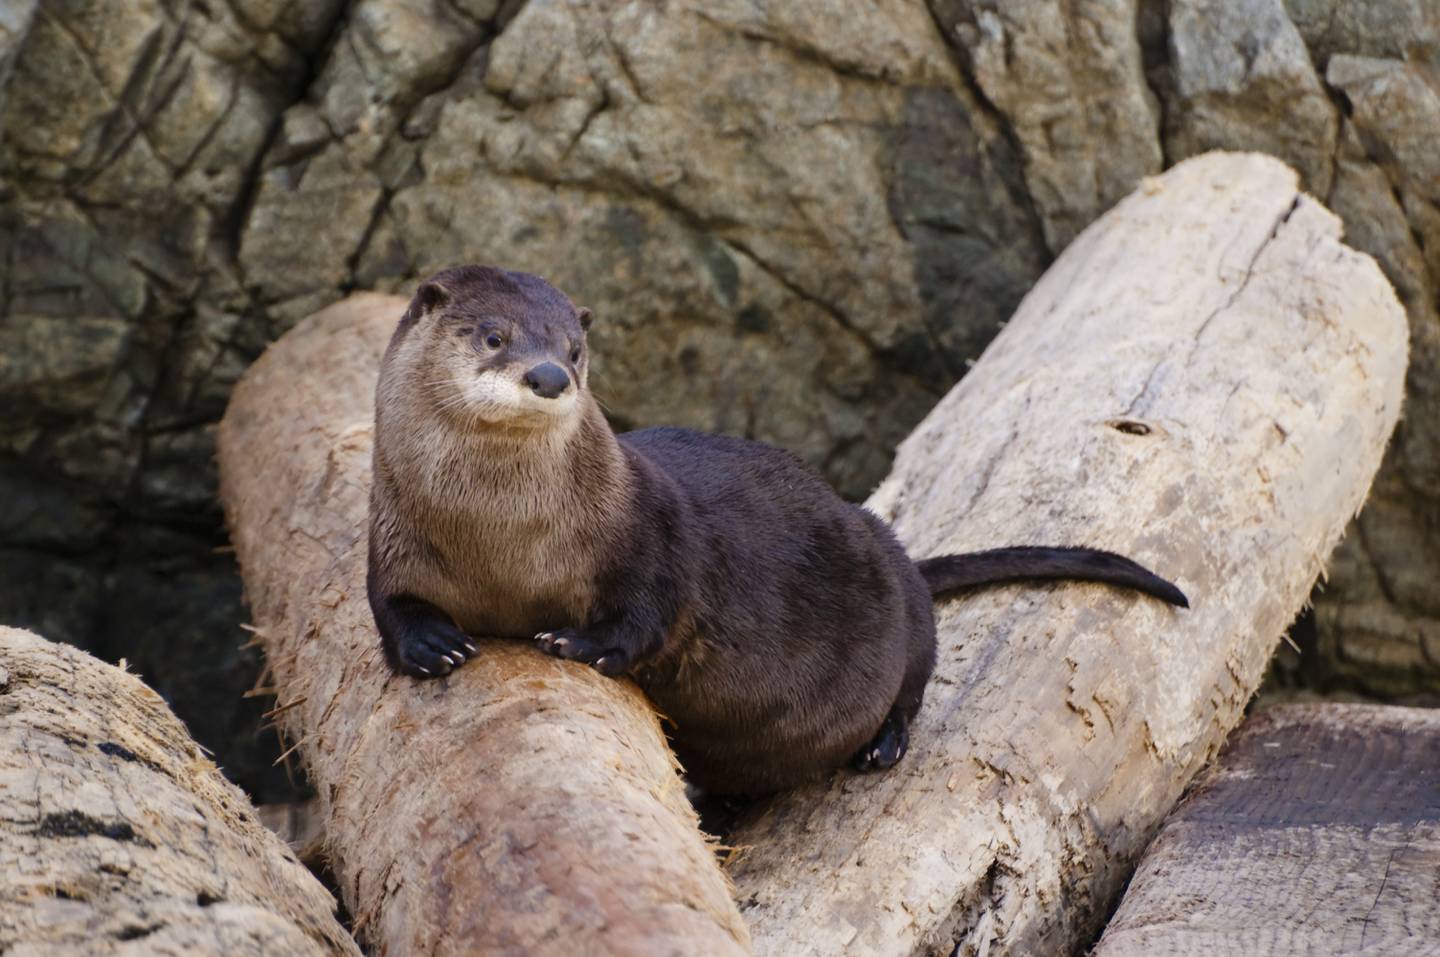 Female North American river otters are induced ovulators, which means they only ovulate after having sex, rather than having regular cycles like humans.